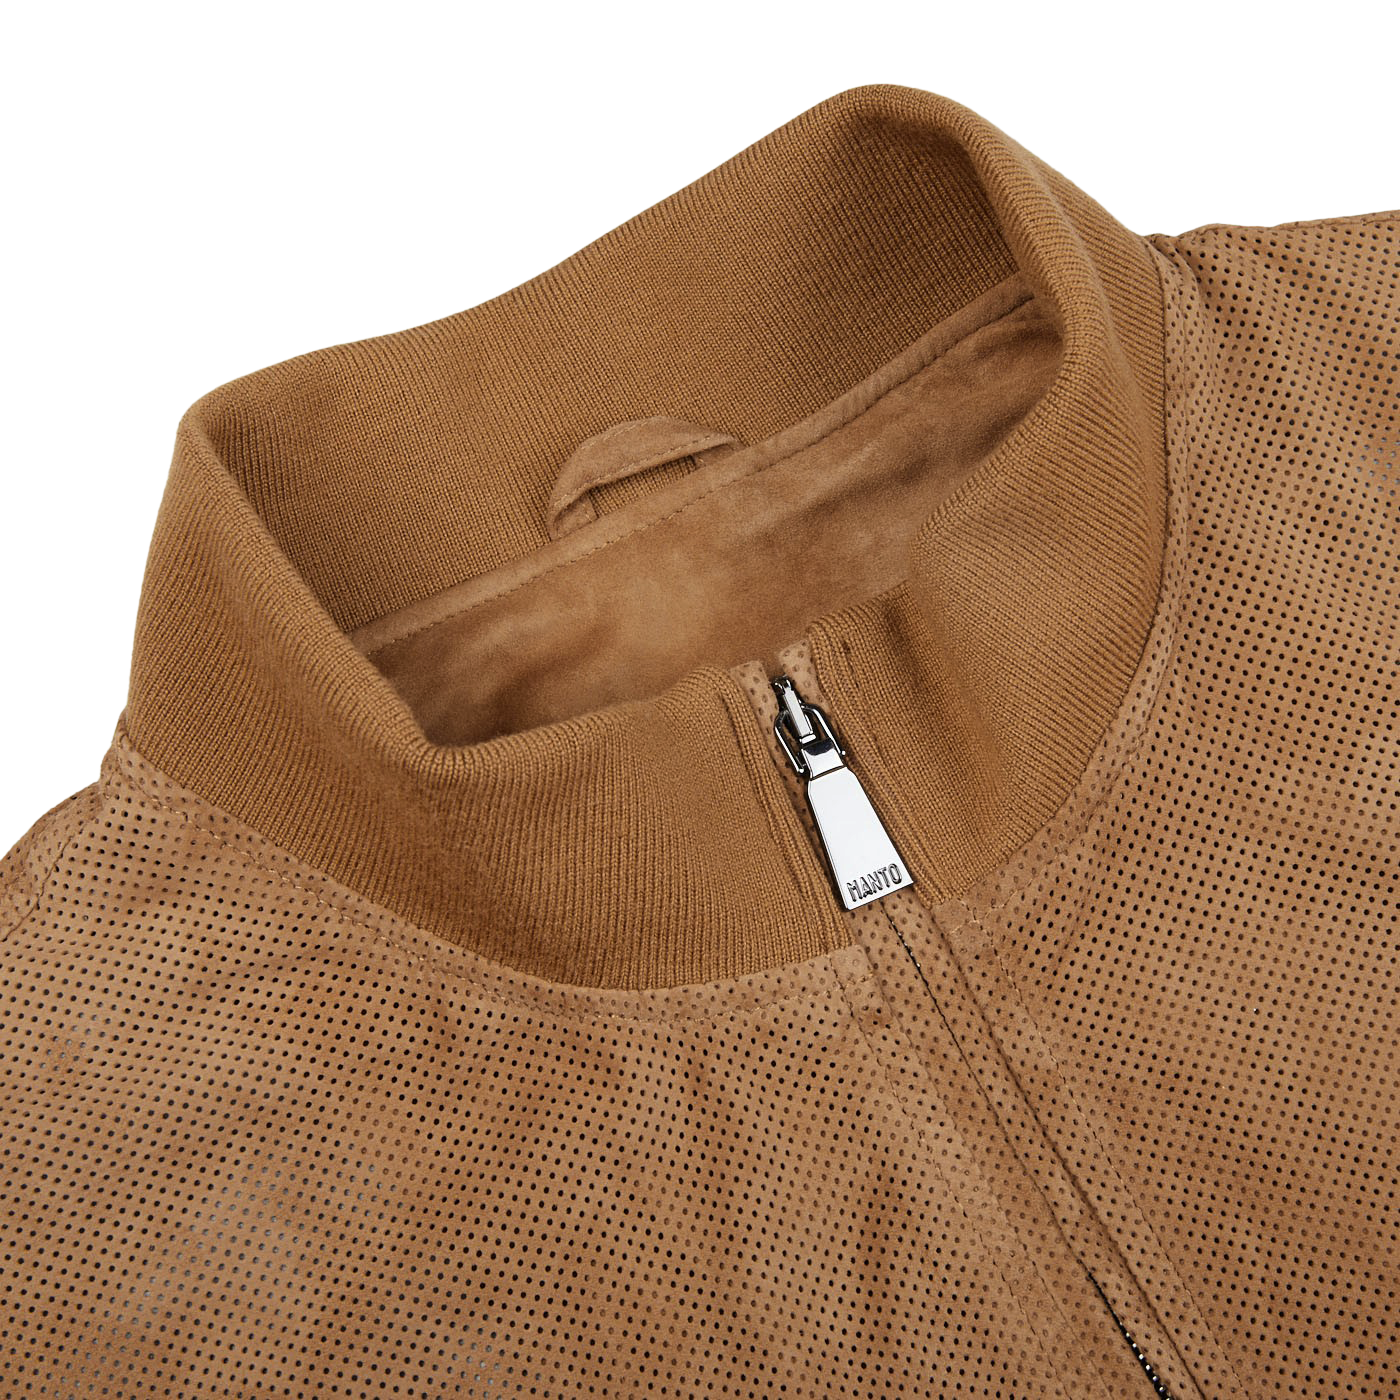 An exquisite Manto Tobacco Brown Perforated Suede Leather Blouson jacket featuring perforated suede leather.